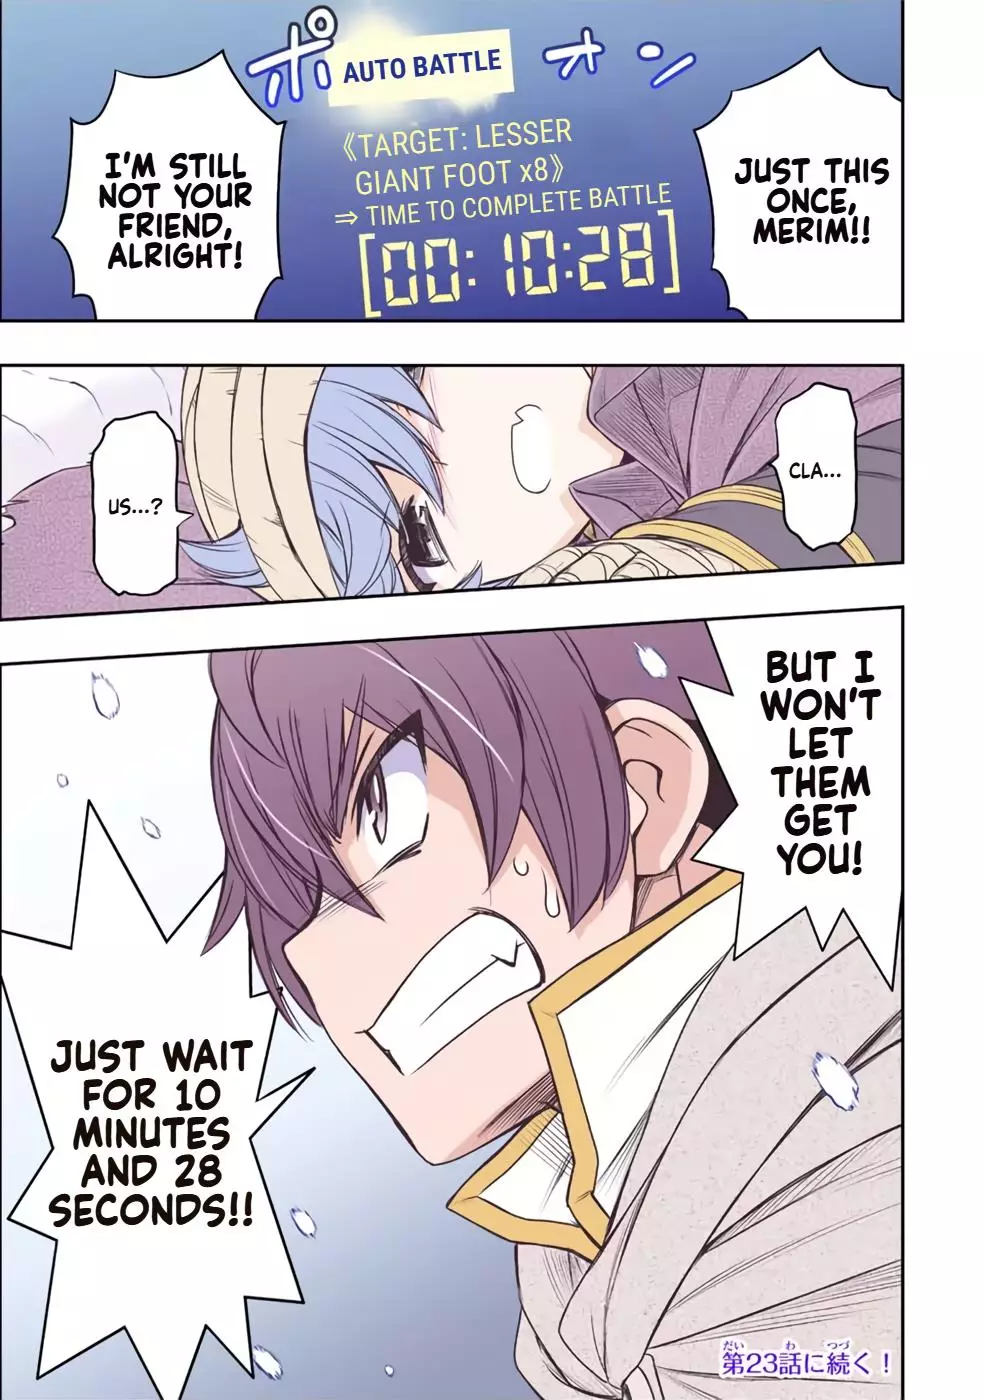 The Useless Skill [Auto Mode] Has Been Awakened ~Huh, Guild's Scout, Didn't You Say I Wasn't Needed Anymore?~ - 19 page 15-9164e729